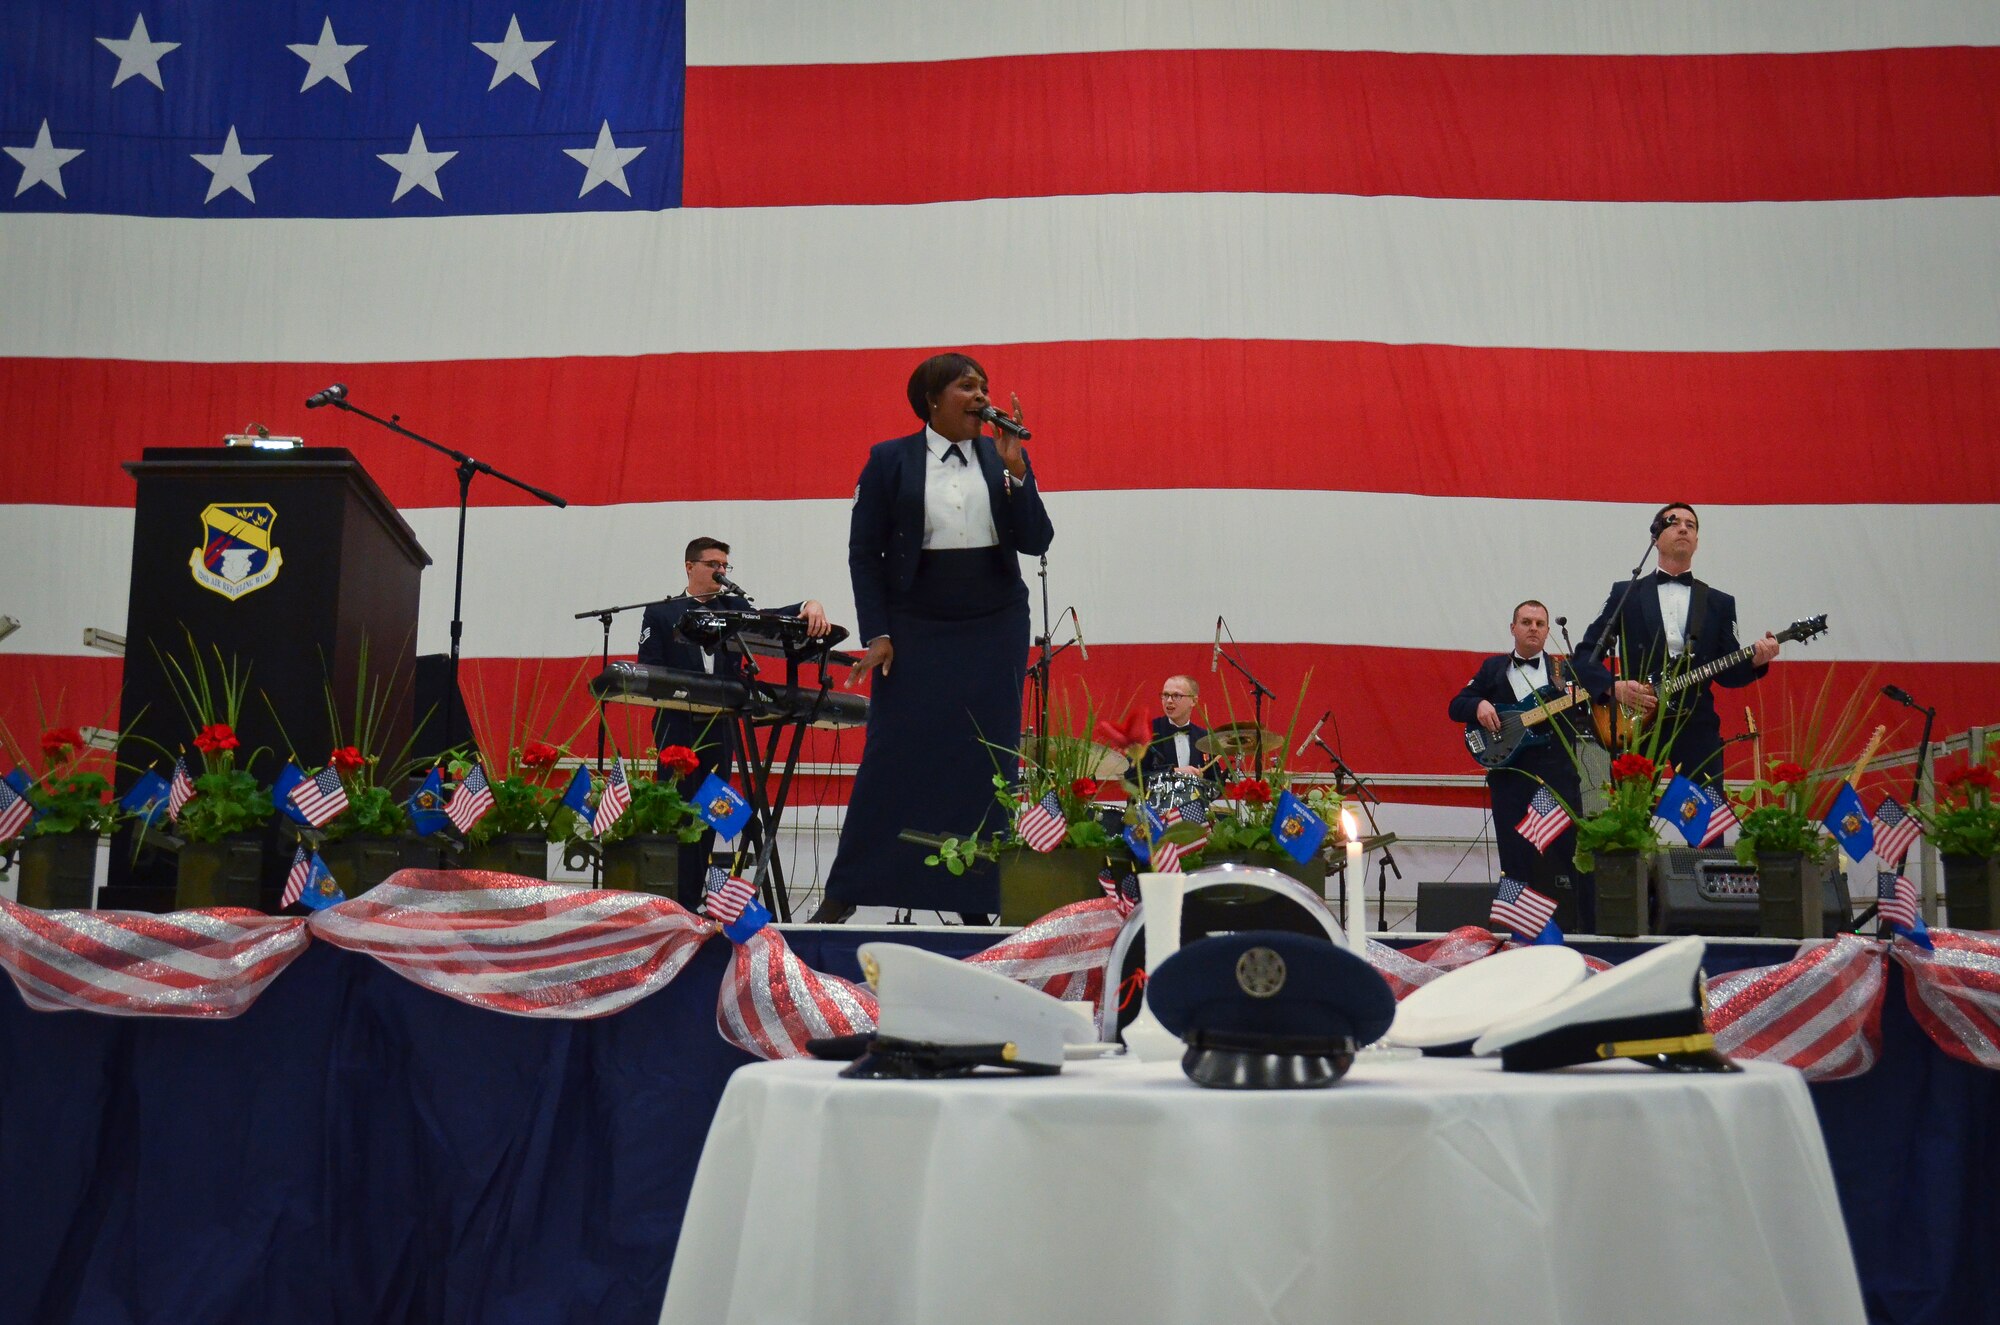 U.S. Air Force Band of Mid-America, Starlifter, based out of Scott Air Force Base, Ill. performs at the 35th annual Civic Dinner Dance in the aircraft hangar here May 14, 2015.  The Civic Dinner Dance is an event coordinated by the Milwaukee Armed Forces Committee for Wisconsin military members, elected state and local officials, and citizens of the local Milwaukee area to celebrate community relations during Armed Forces Week.  (U.S. Air National Guard photo by Tech. Sgt. Jenna Lenski/Released)